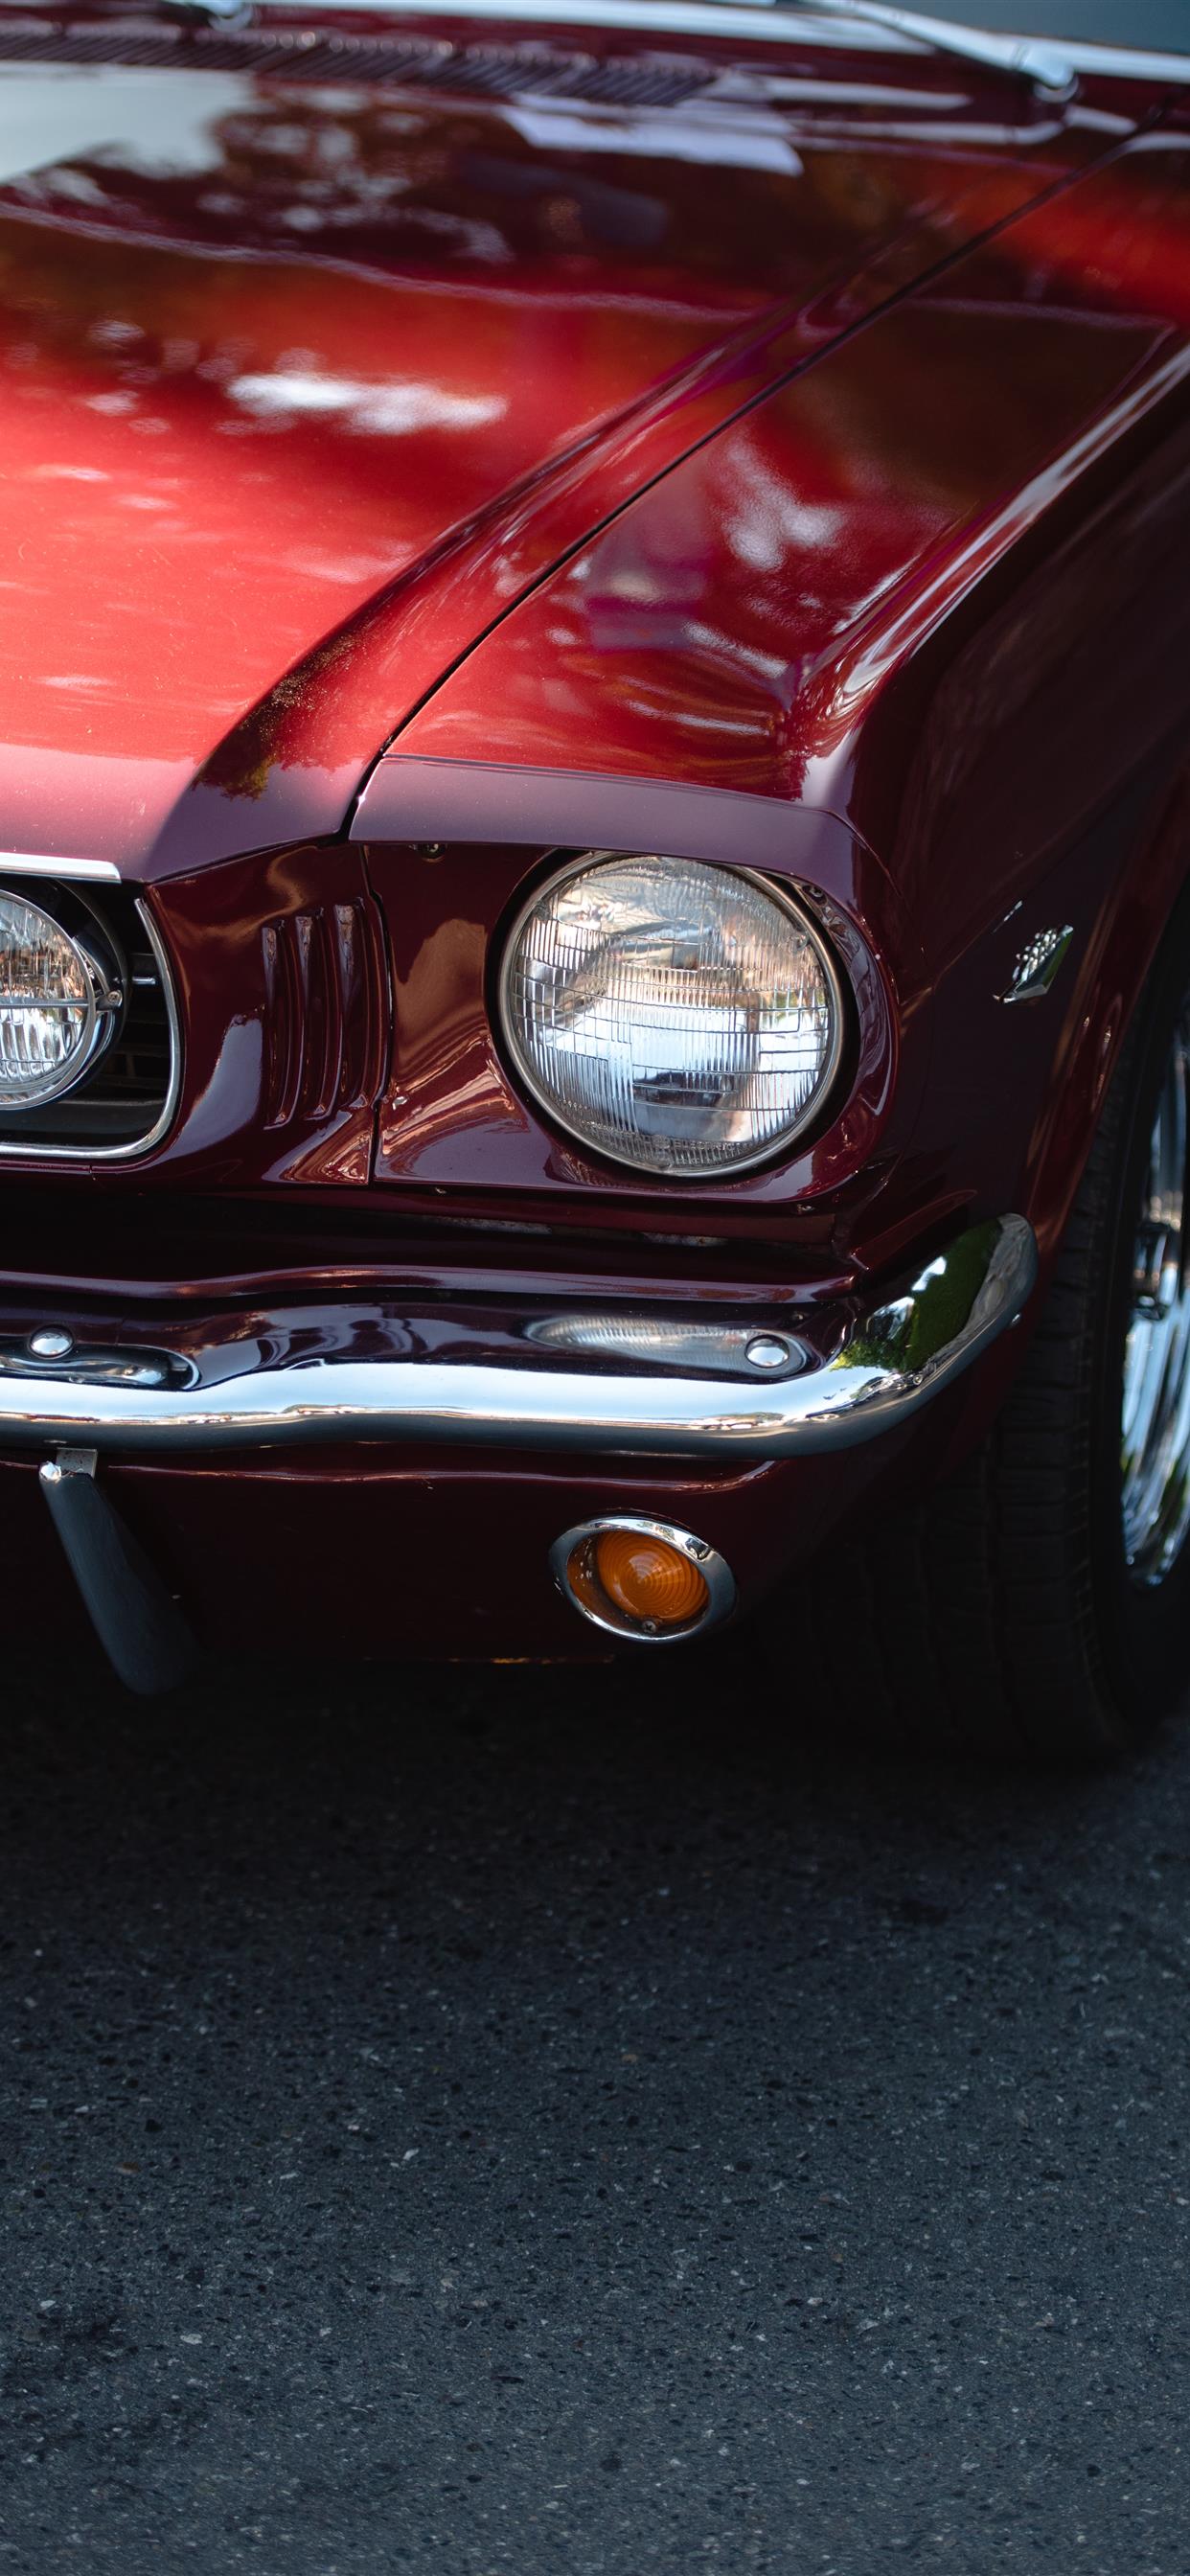 From the Oak Bay Car Show iPhone Wallpaper Free Download